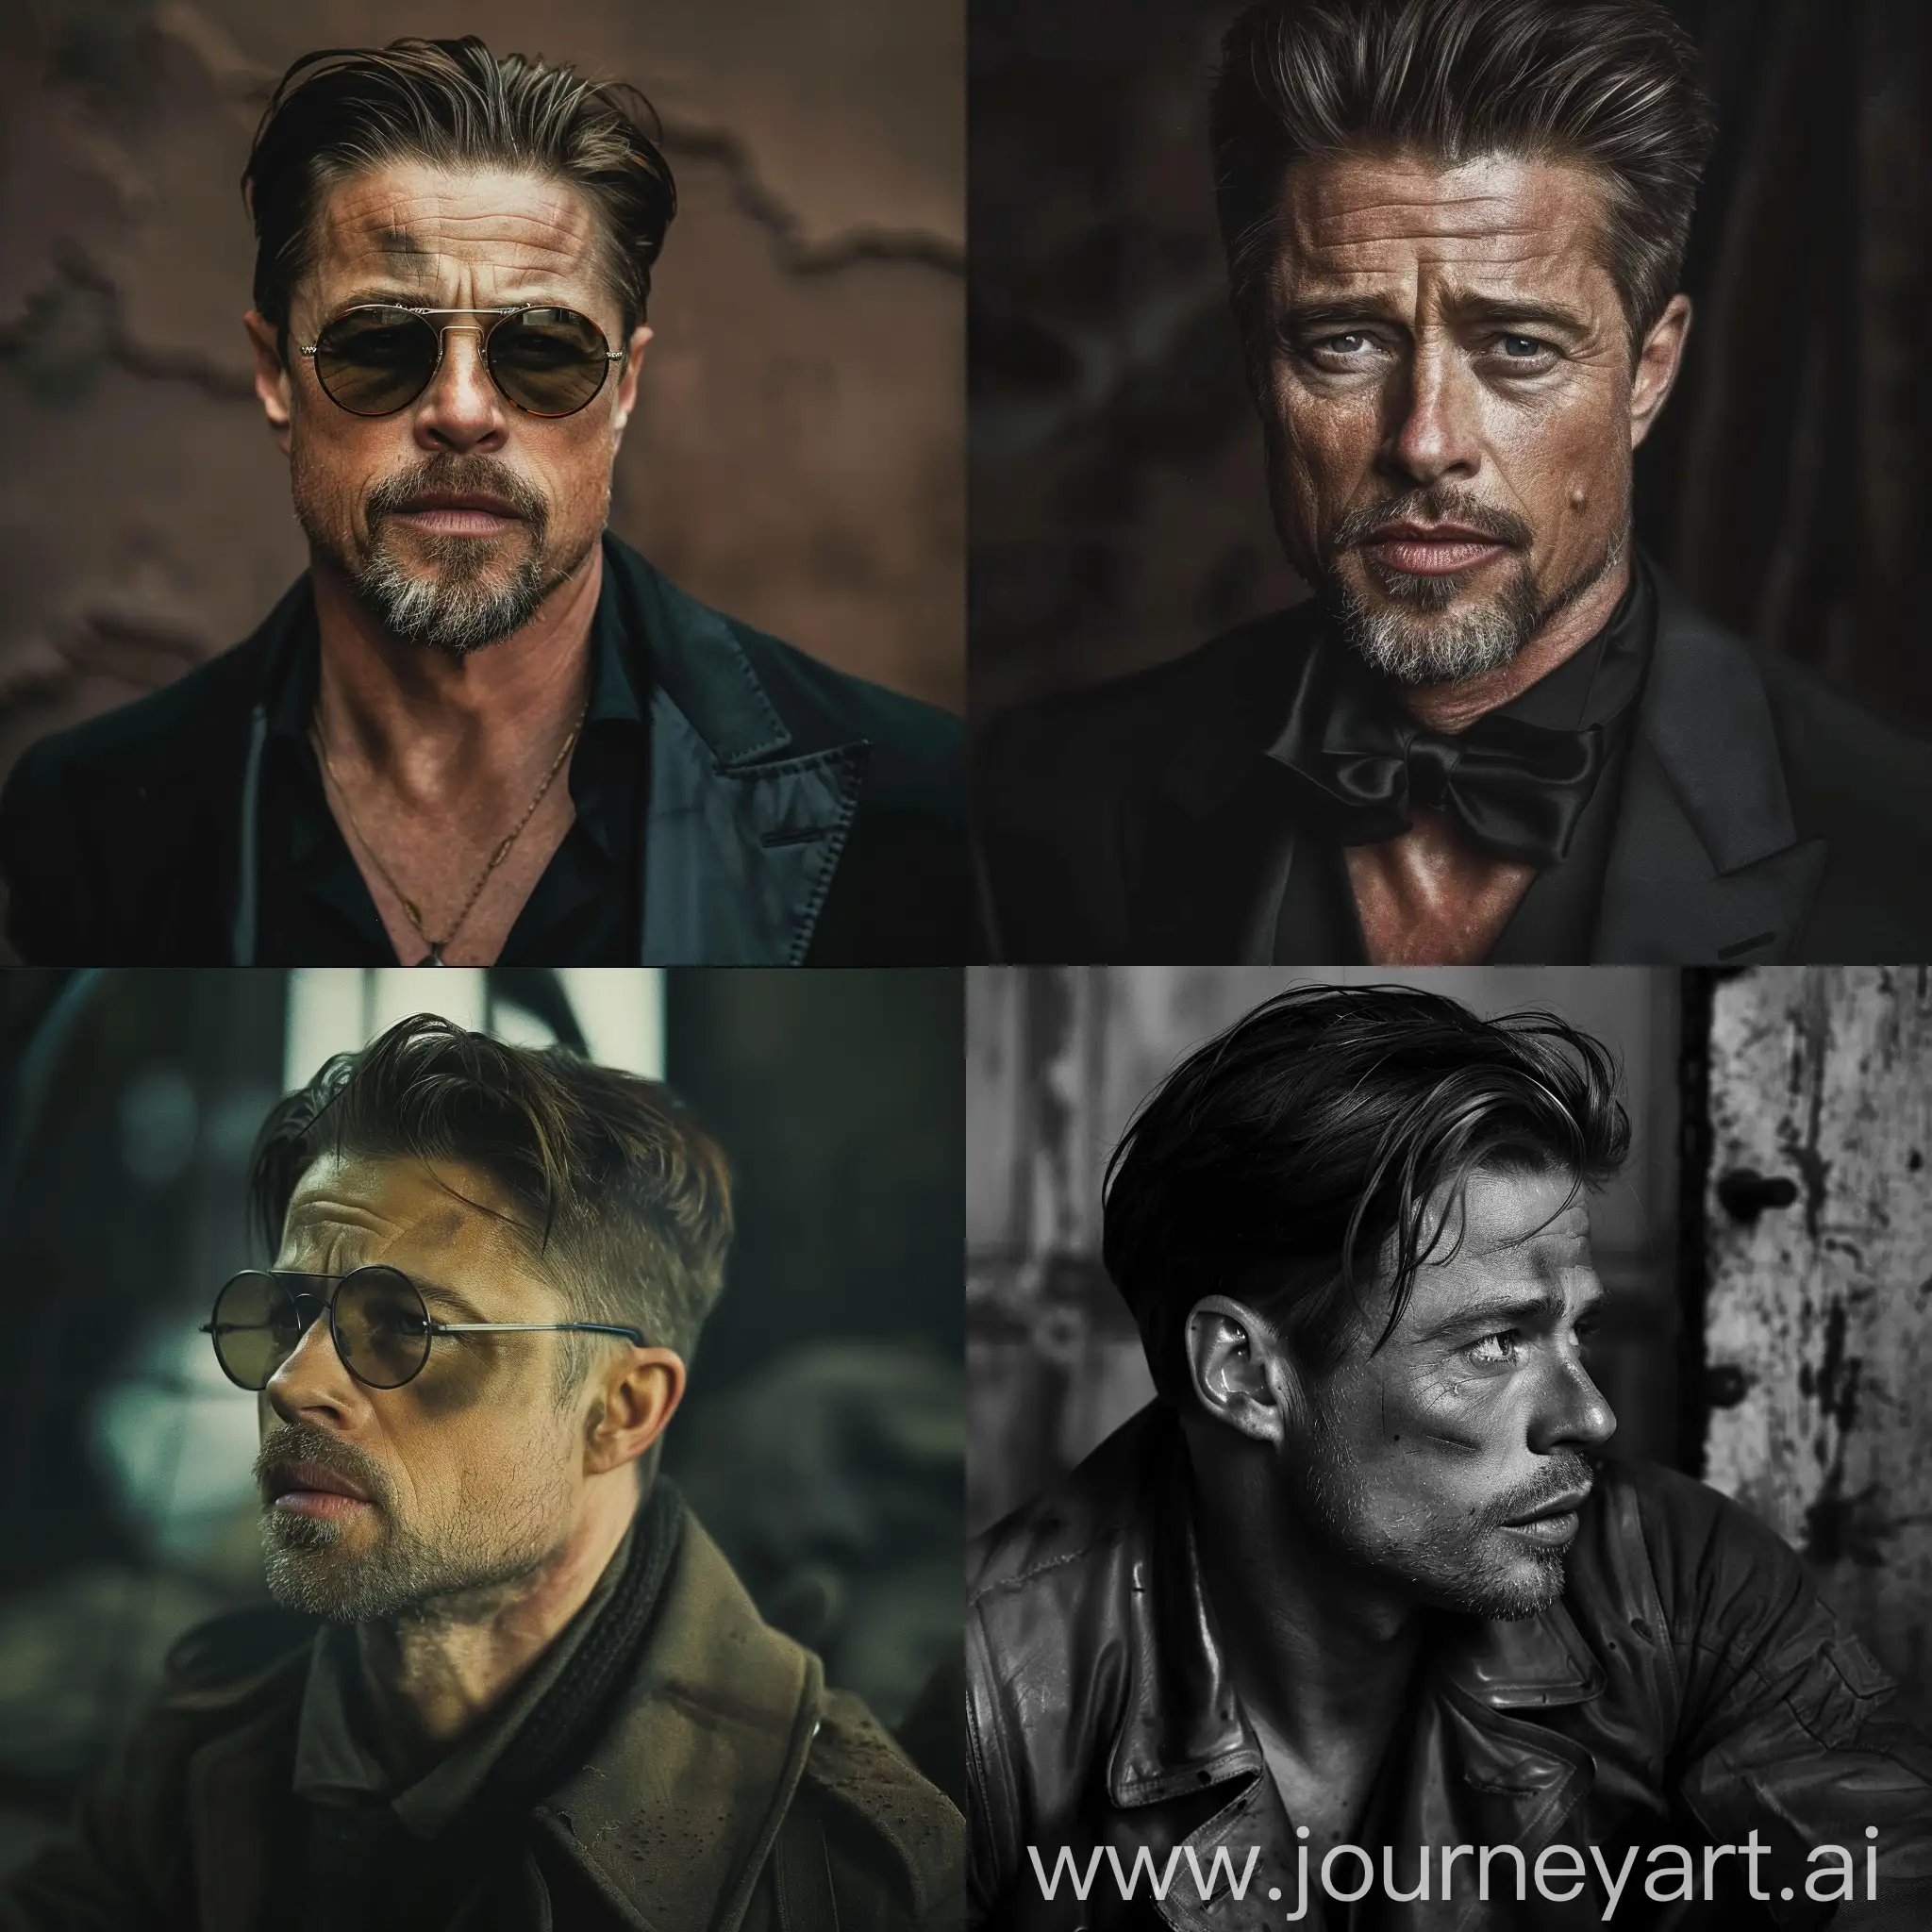 Brad-Pitt-with-KGB-Agent-Hairstyle-in-Black-Suit